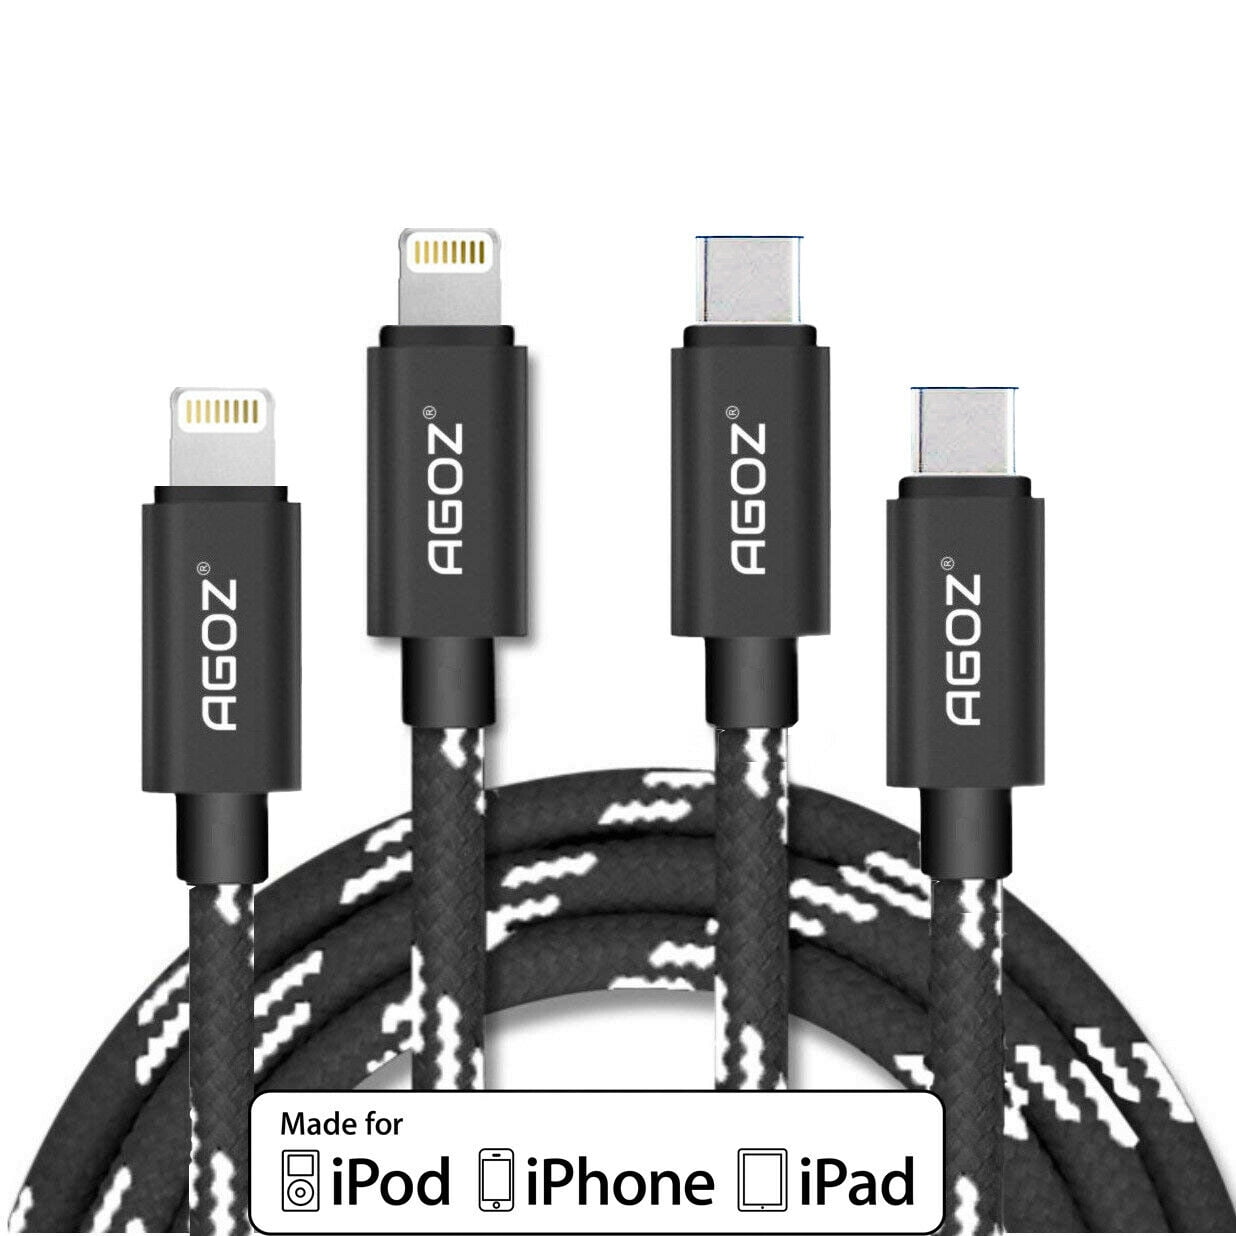 Apple MFi Certified iPhone Charger Cable 10ft High Fast/Data Sync 10 Feet Apple Charging Cable Cord for Apple iPhone 13/12/11 Pro/11/XS MAX/XR/8/7/6s/6/Plus/5,iPad 2Pack Long Lightning Cable 10 Foot 